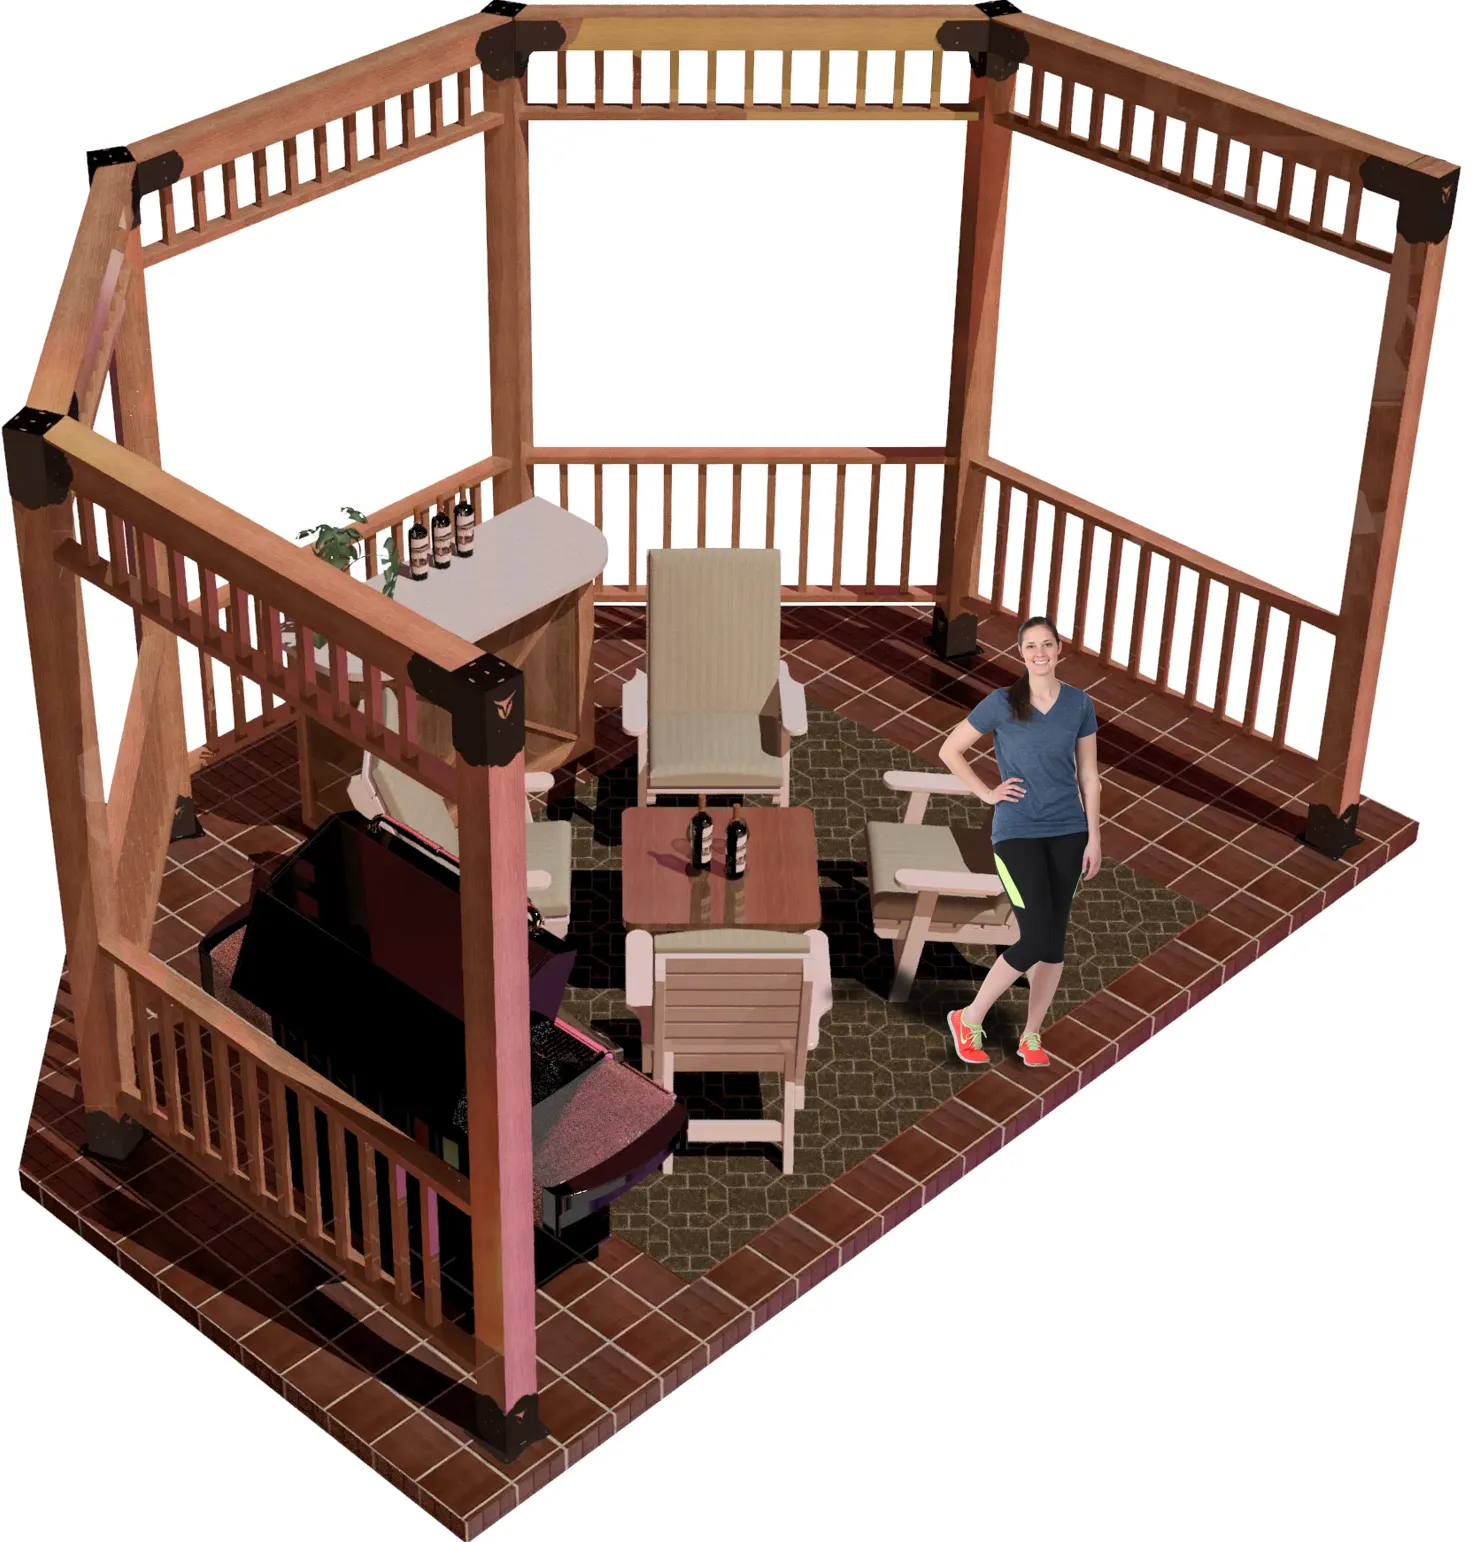 view of a DIY6x6 open top partial octagon pergola. A bar with wine bottles, barbecuer, and casual furniture inside and a girl standing and smiling inside it.